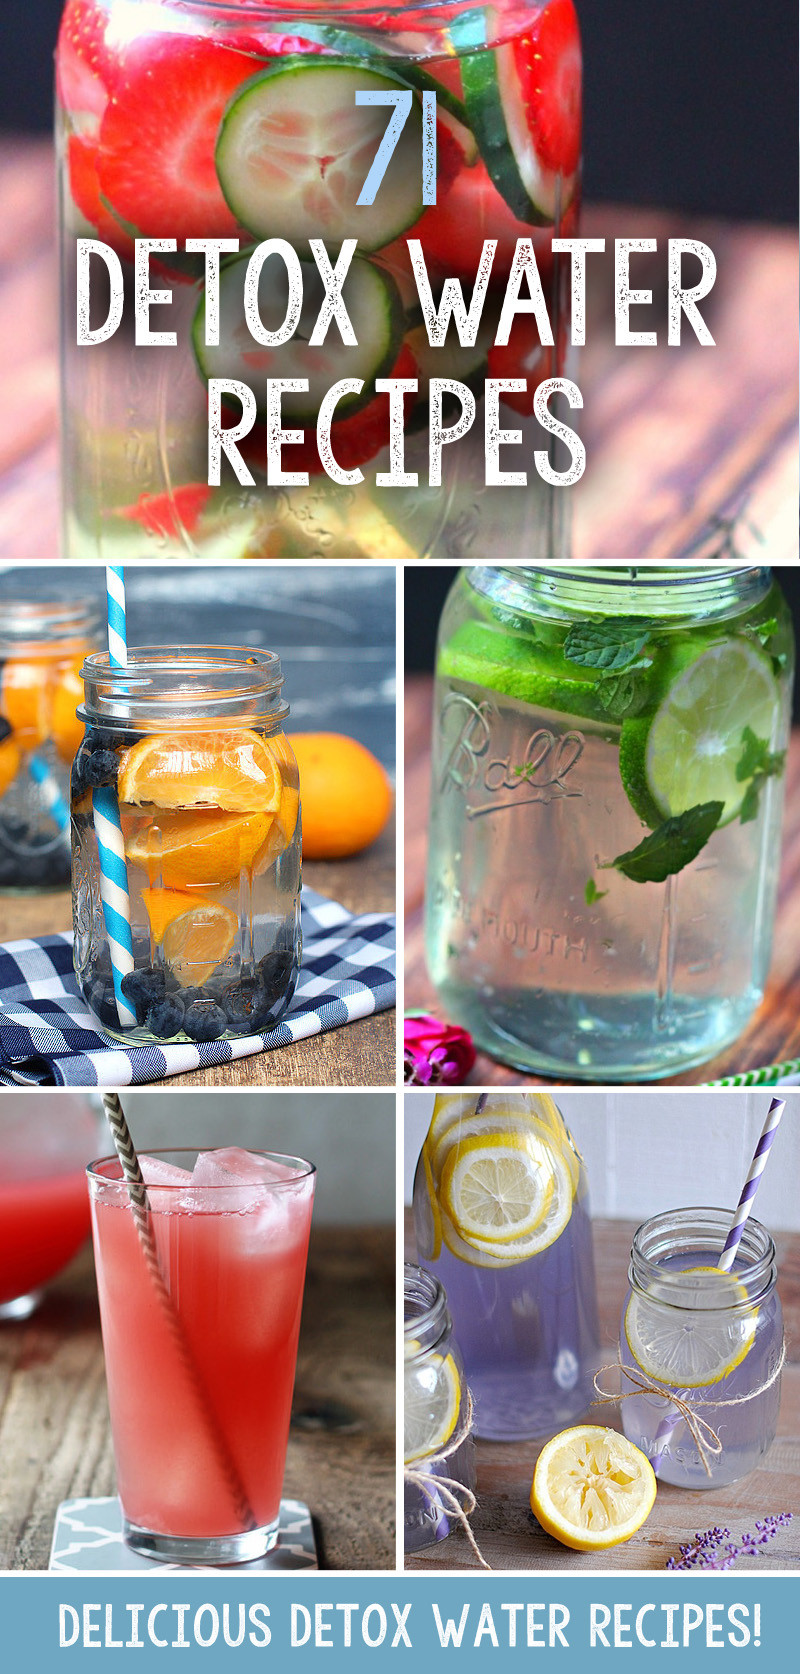 Detox Recipes For Weight Loss
 71 Delicious Detox Water Recipes To Help You Lose Weight Fast